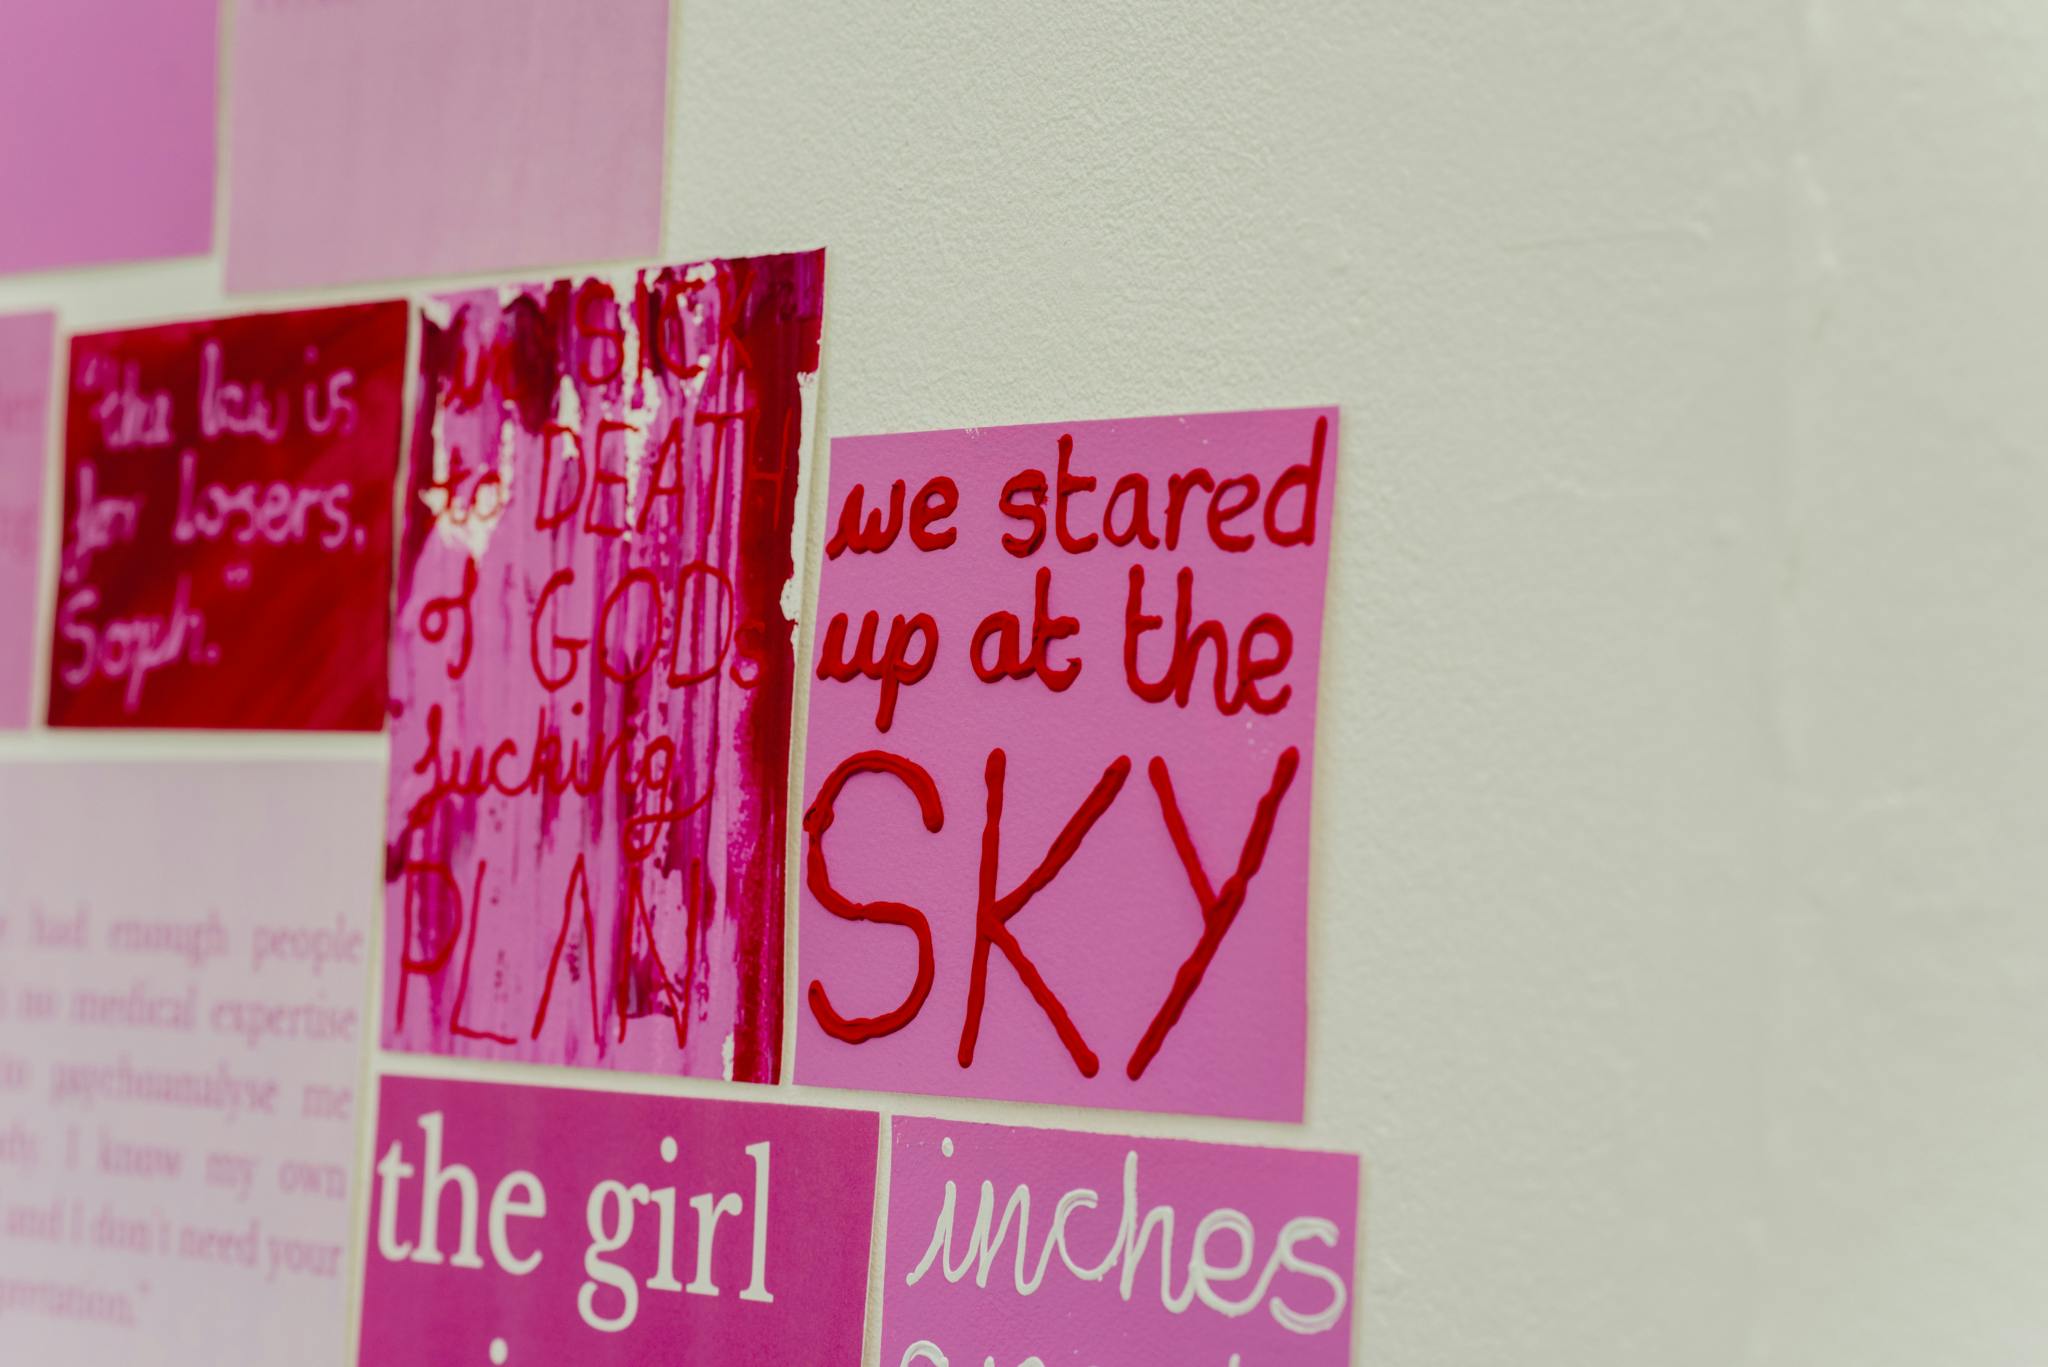 Image shows a wall with lots of pink quotes and images on it, the one in the foreground reading 'we stared up at the sky'